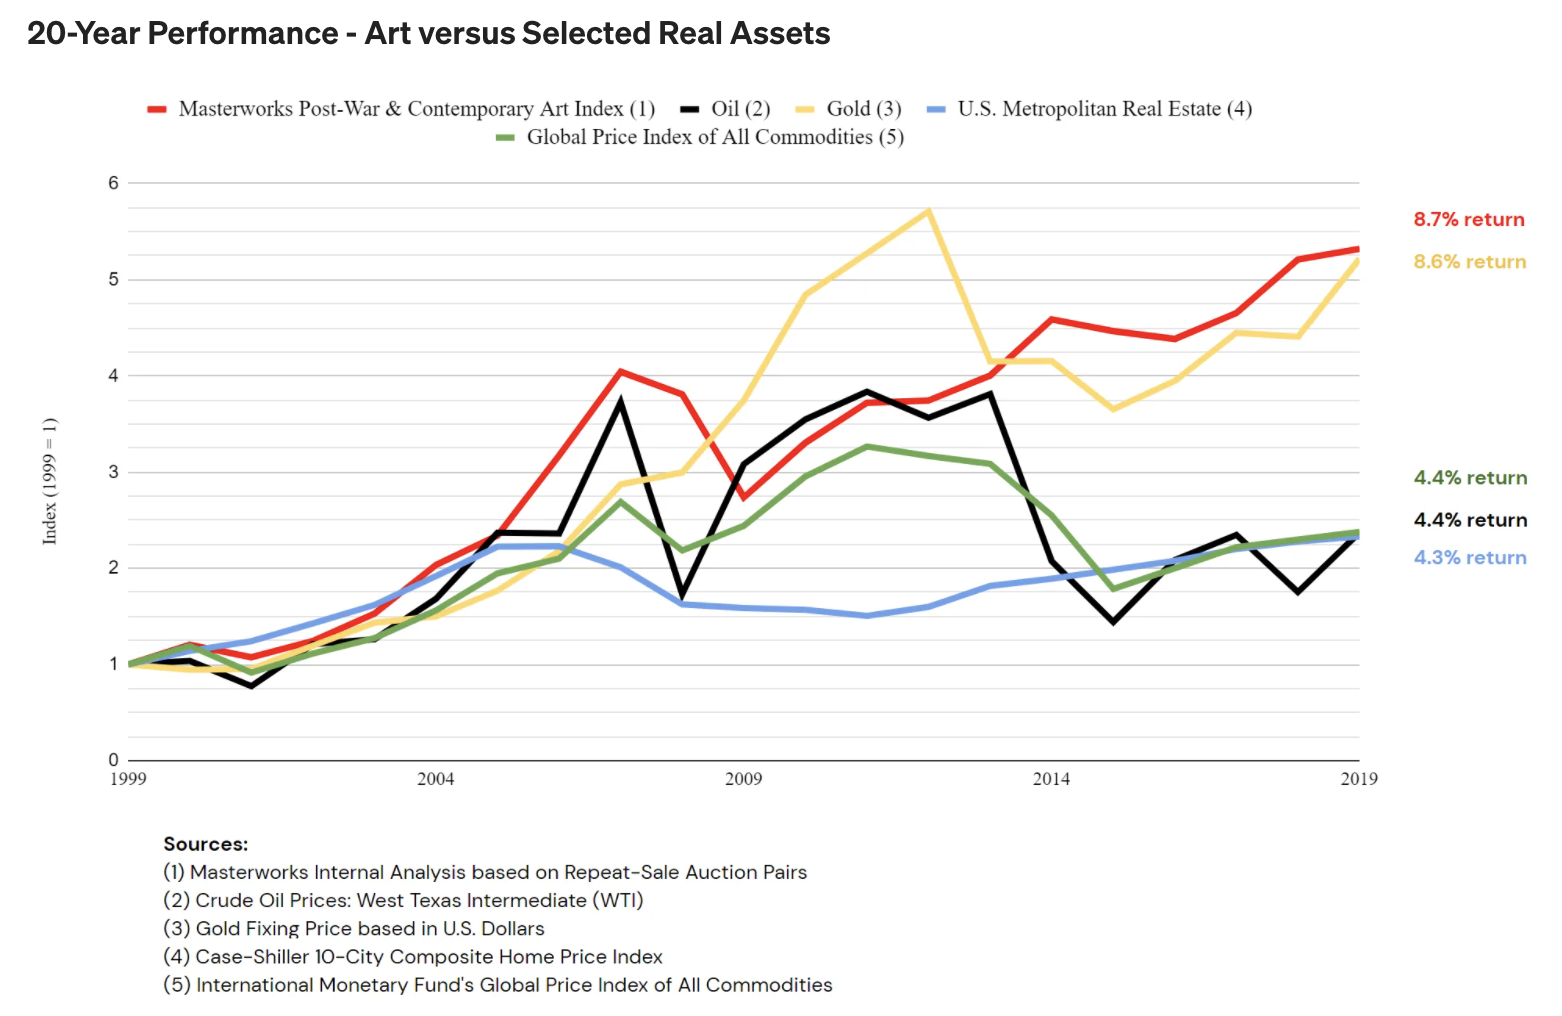 Chart showing performance of art investments versus other assets